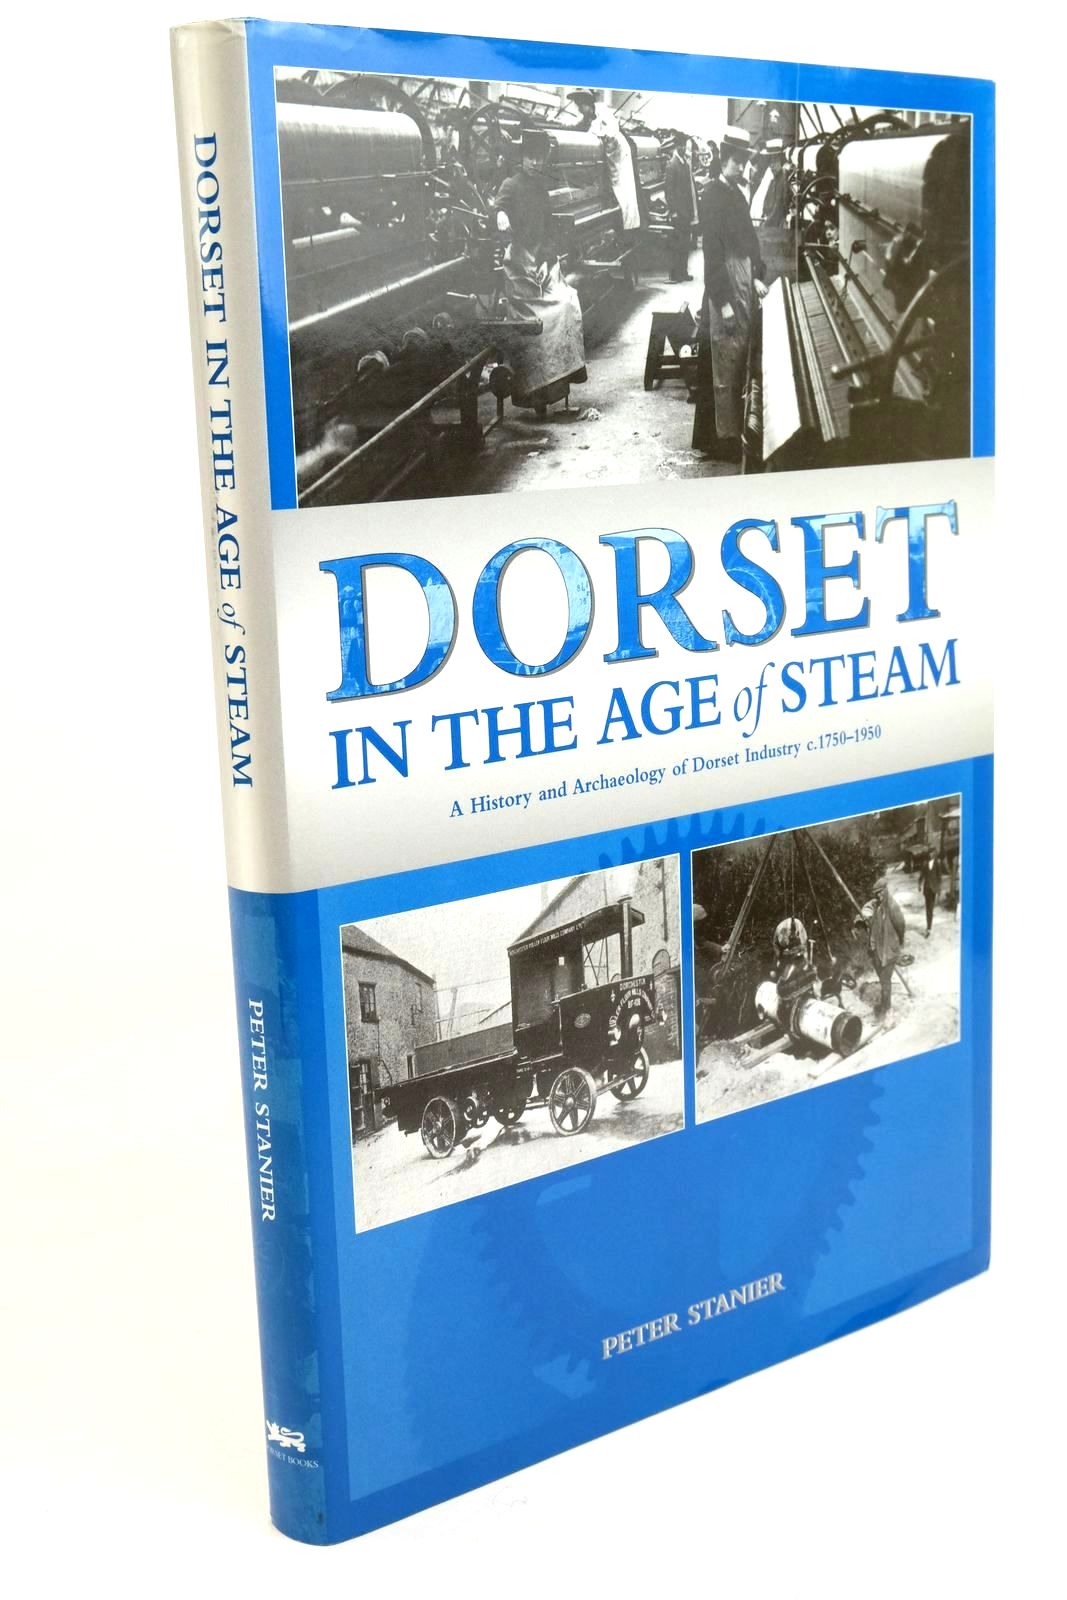 Photo of DORSET IN THE AGE OF STEAM written by Stanier, Peter published by Dorset Books (STOCK CODE: 1322451)  for sale by Stella & Rose's Books